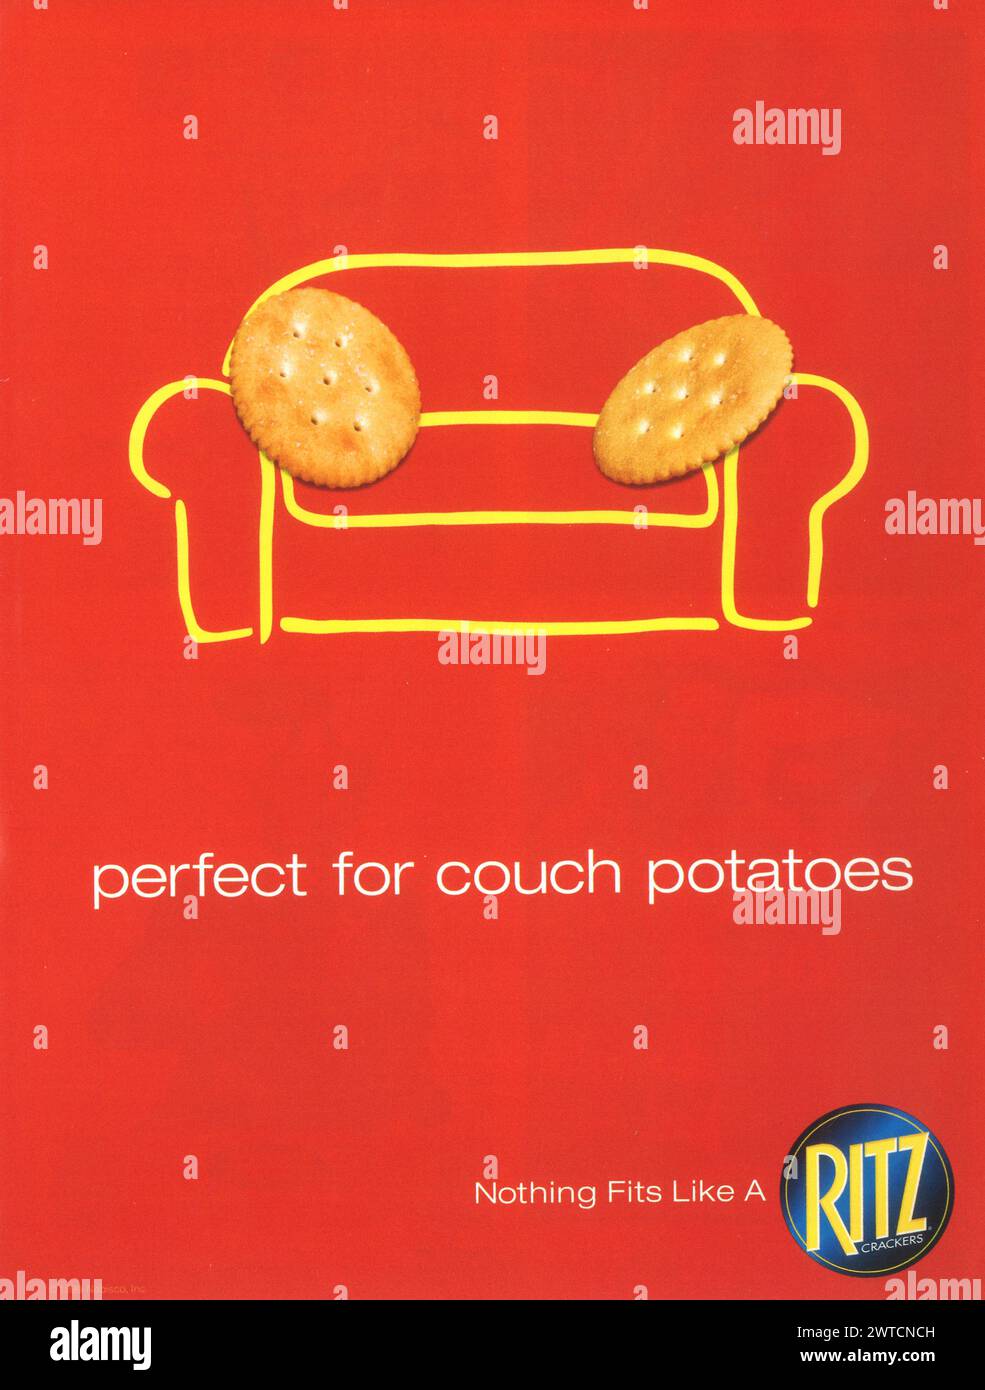 1990s Ritz Crackers Sport Bumpers Ad - Perfect For Couch Potatoes Stock Photo